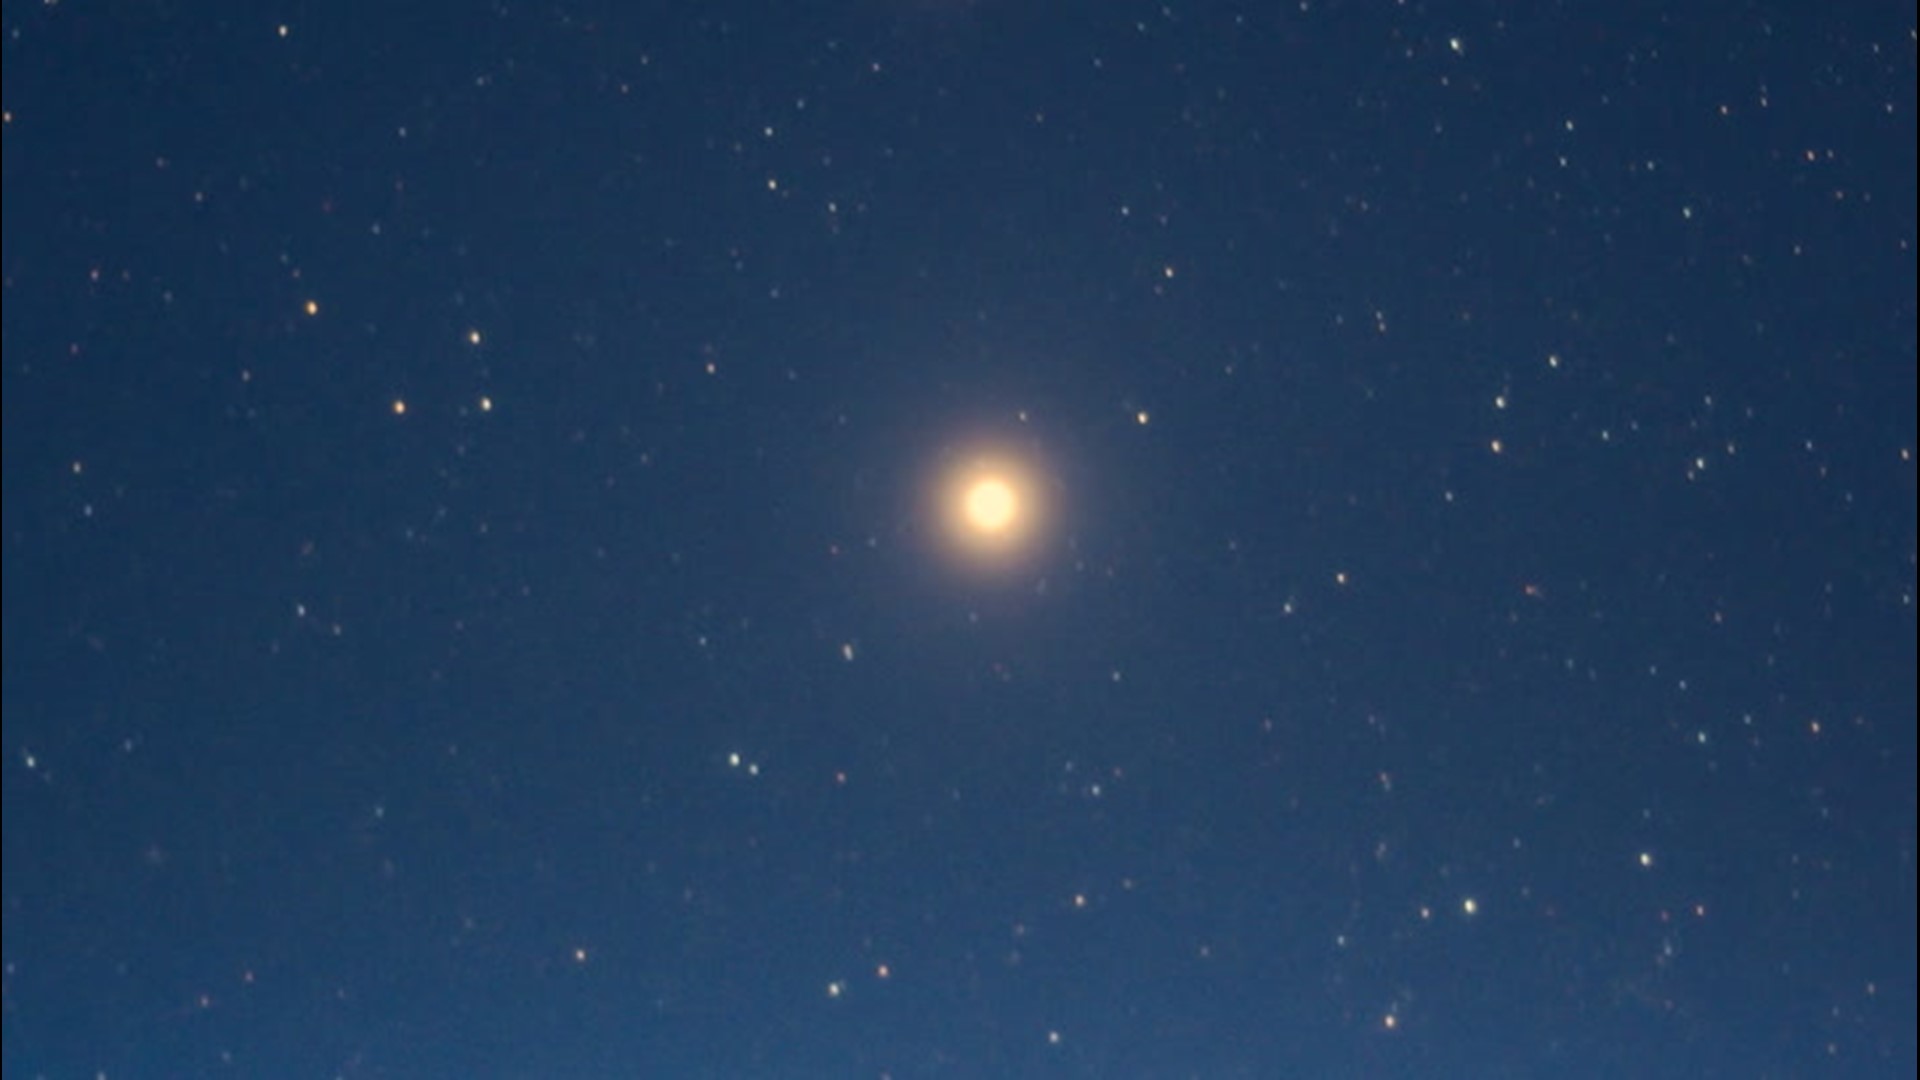 On Dec. 21, catch the great conjunction of Jupiter and Saturn, where the two gas giants will look like one bright star. Astronomers are also calling this a 'Christmas Star,' let's find out why.